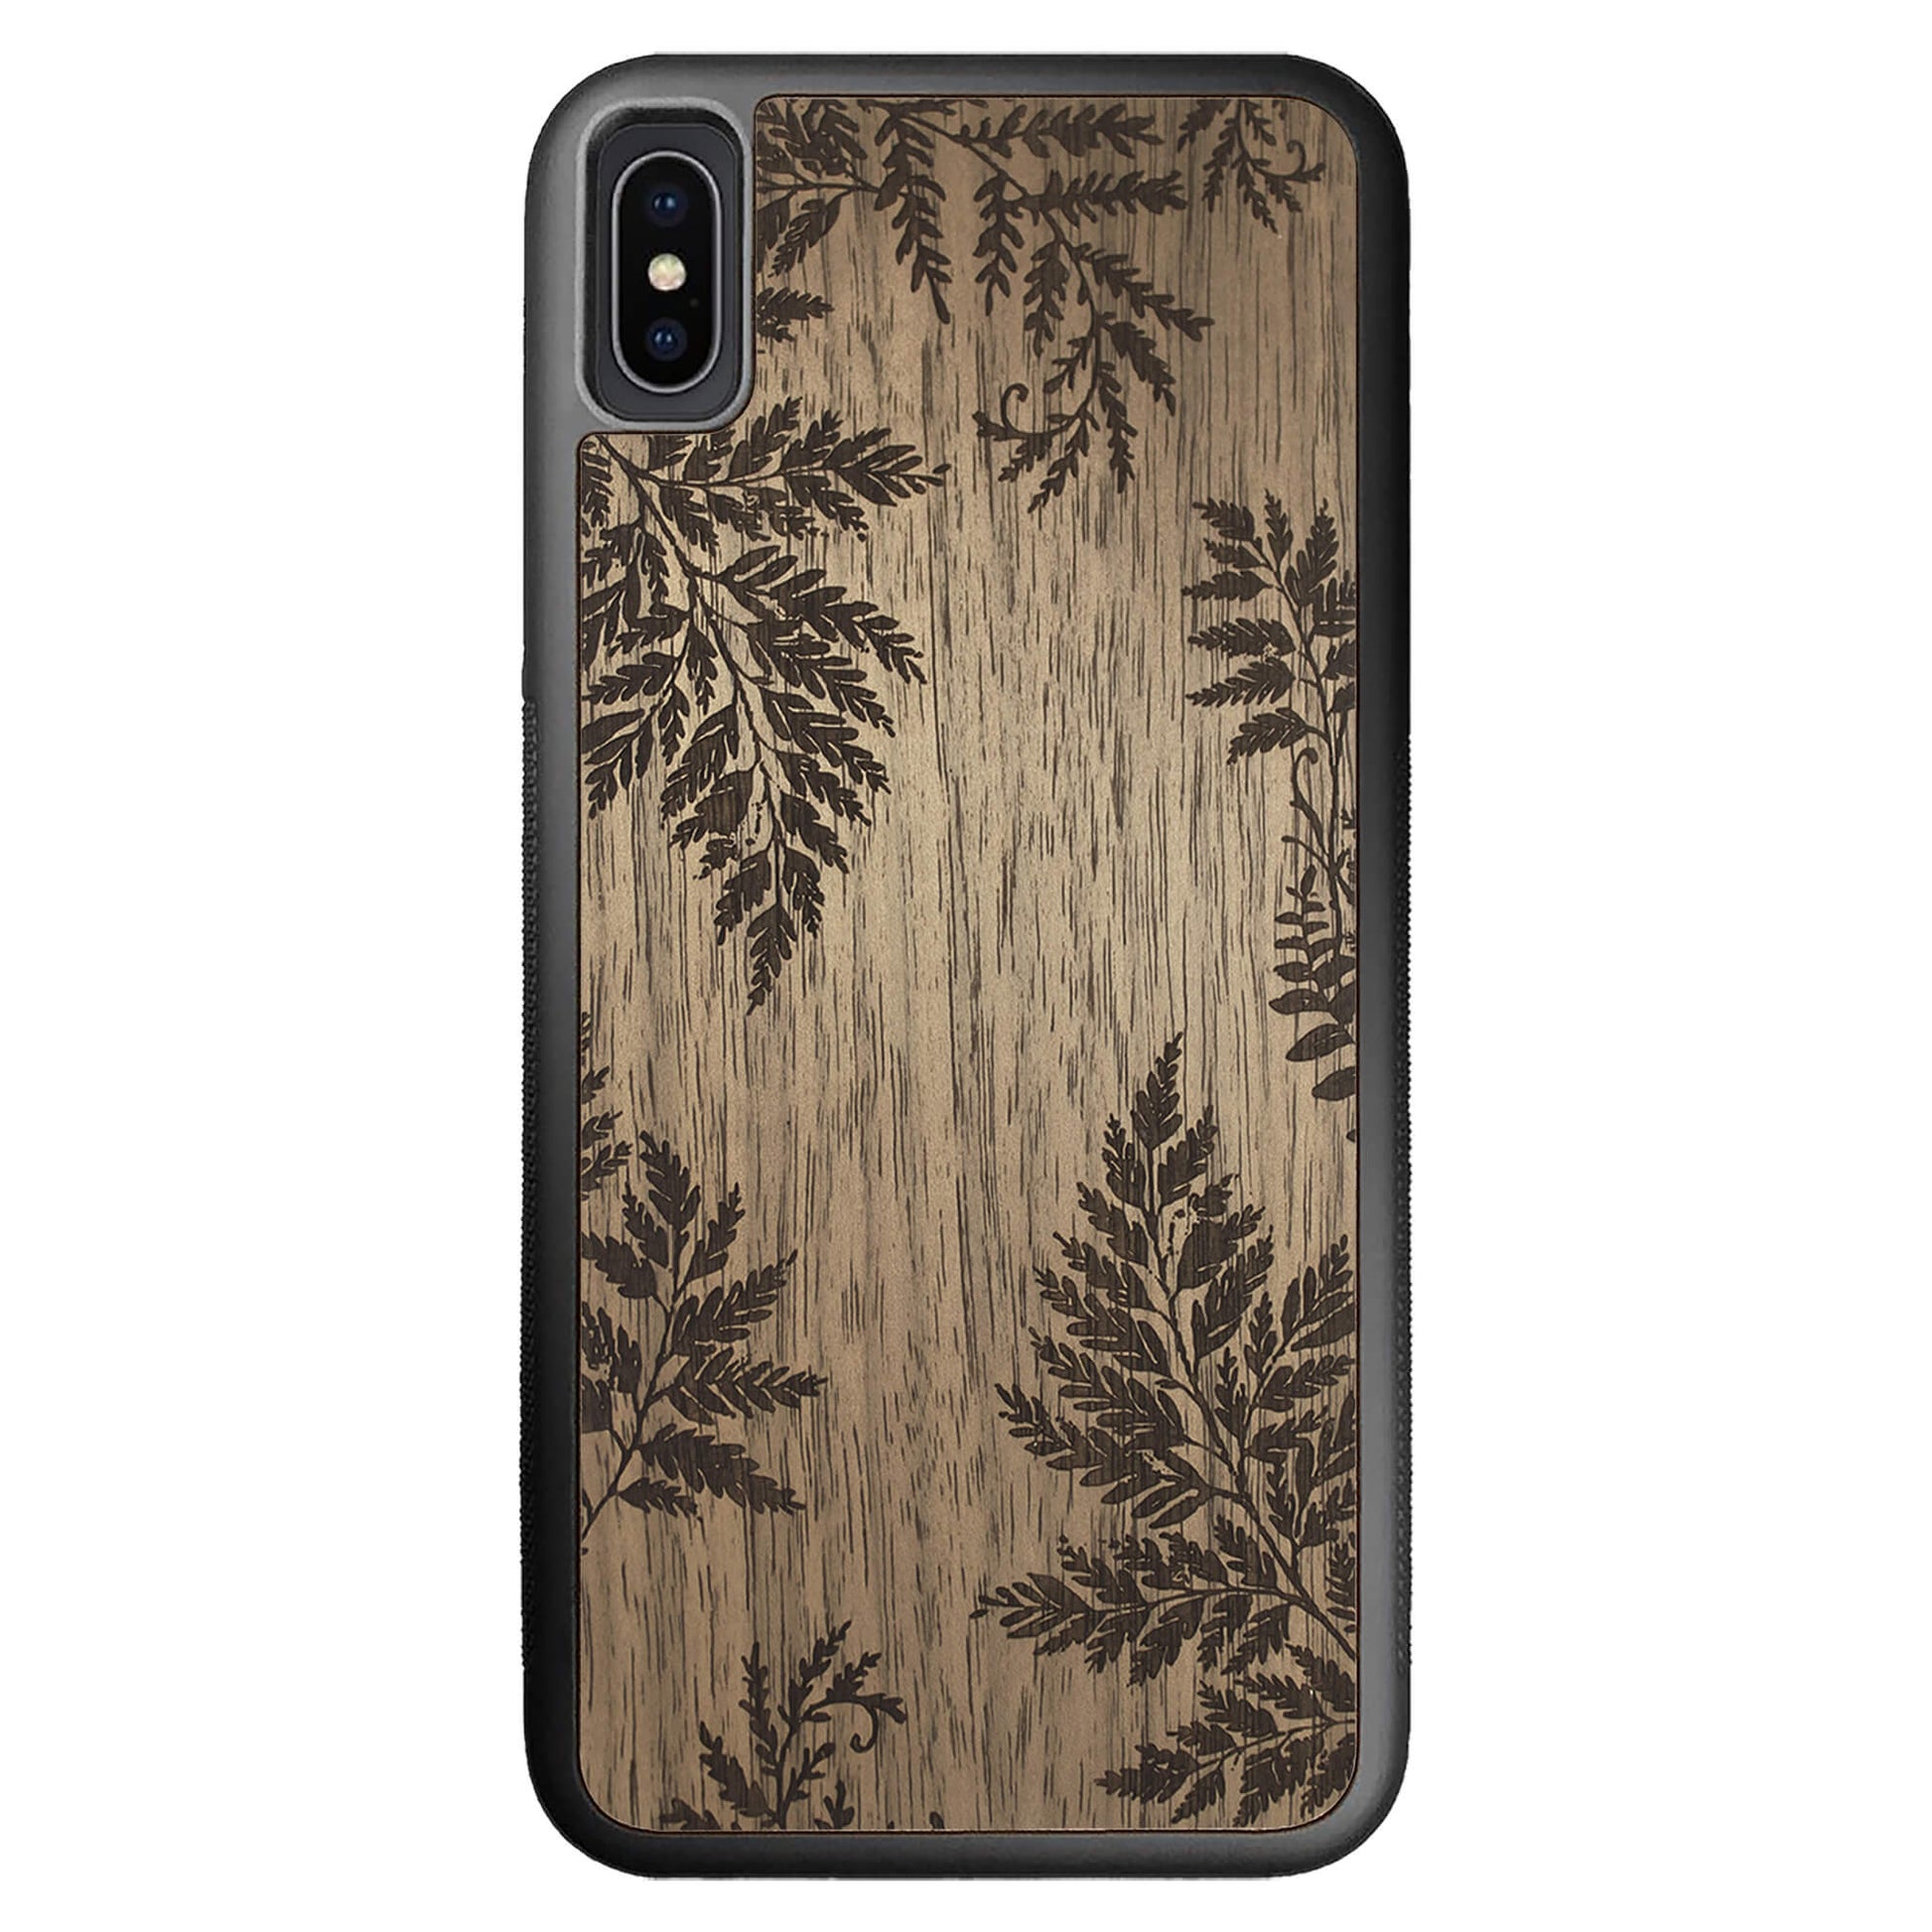 Wooden Case for iPhone XS Max Botanical Fern